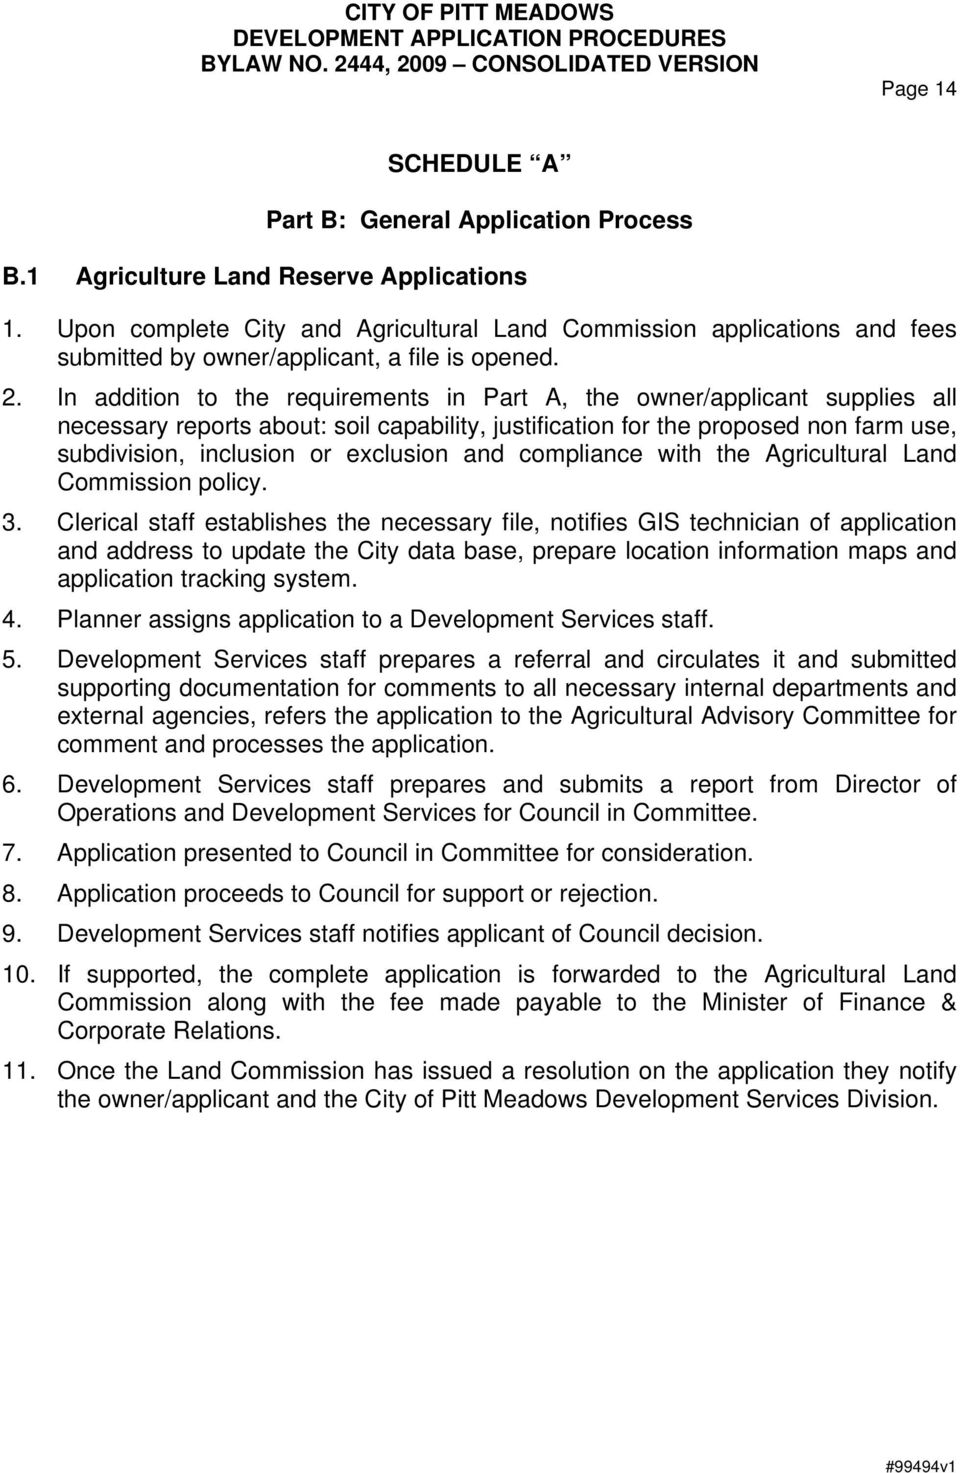 In addition to the requirements in Part A, the owner/applicant supplies all necessary reports about: soil capability, justification for the proposed non farm use, subdivision, inclusion or exclusion